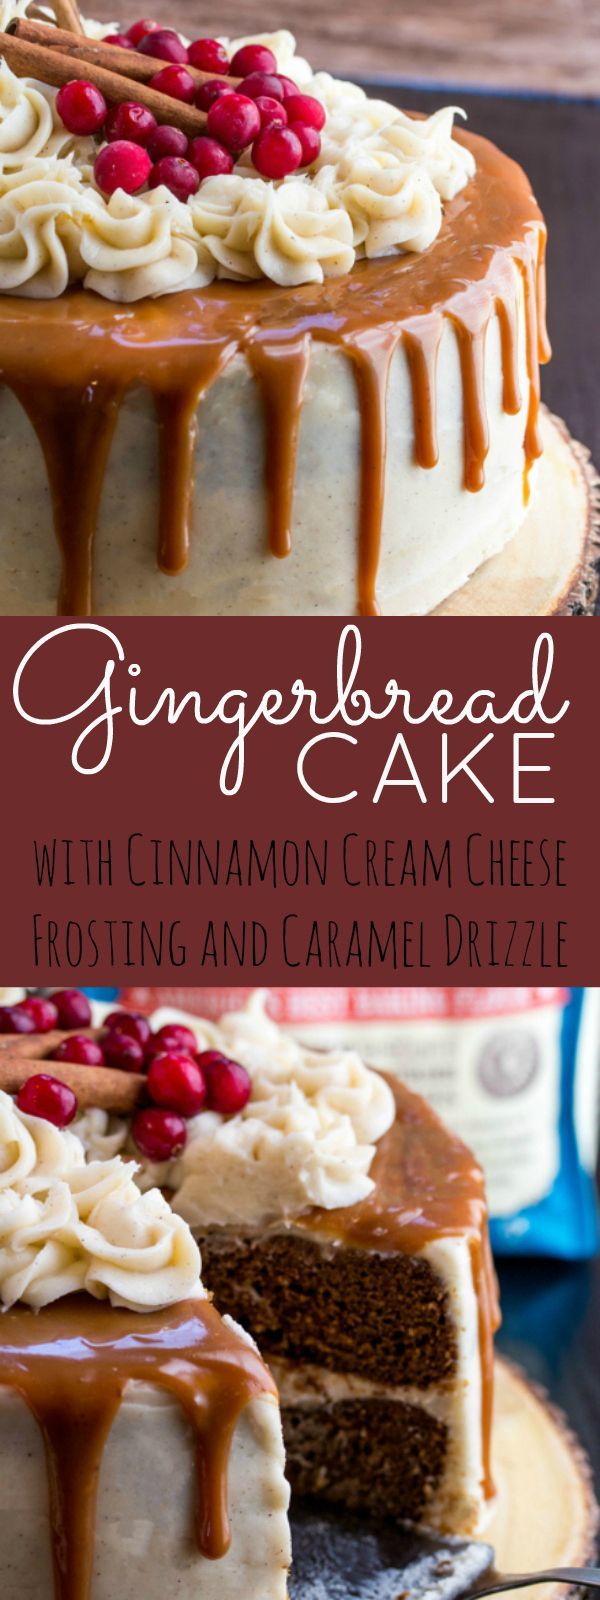 Gingerbread Cake with Cinnamon Cream Cheese Frosting and Caramel Drizzle